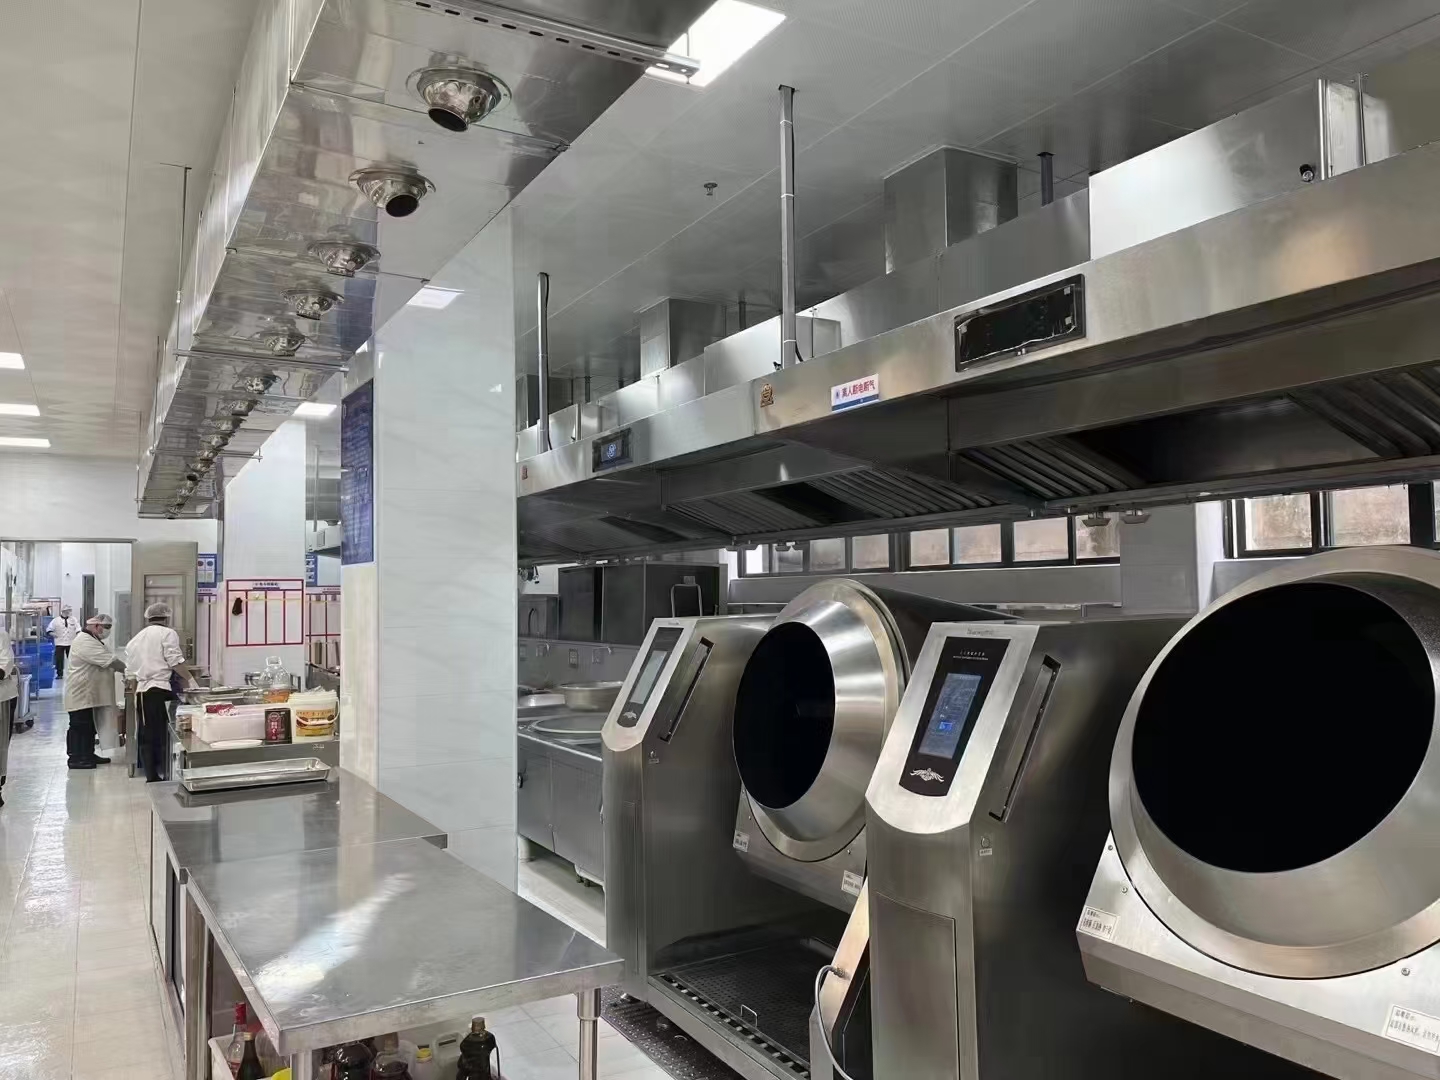 The application of Lestov automatic cooking machines